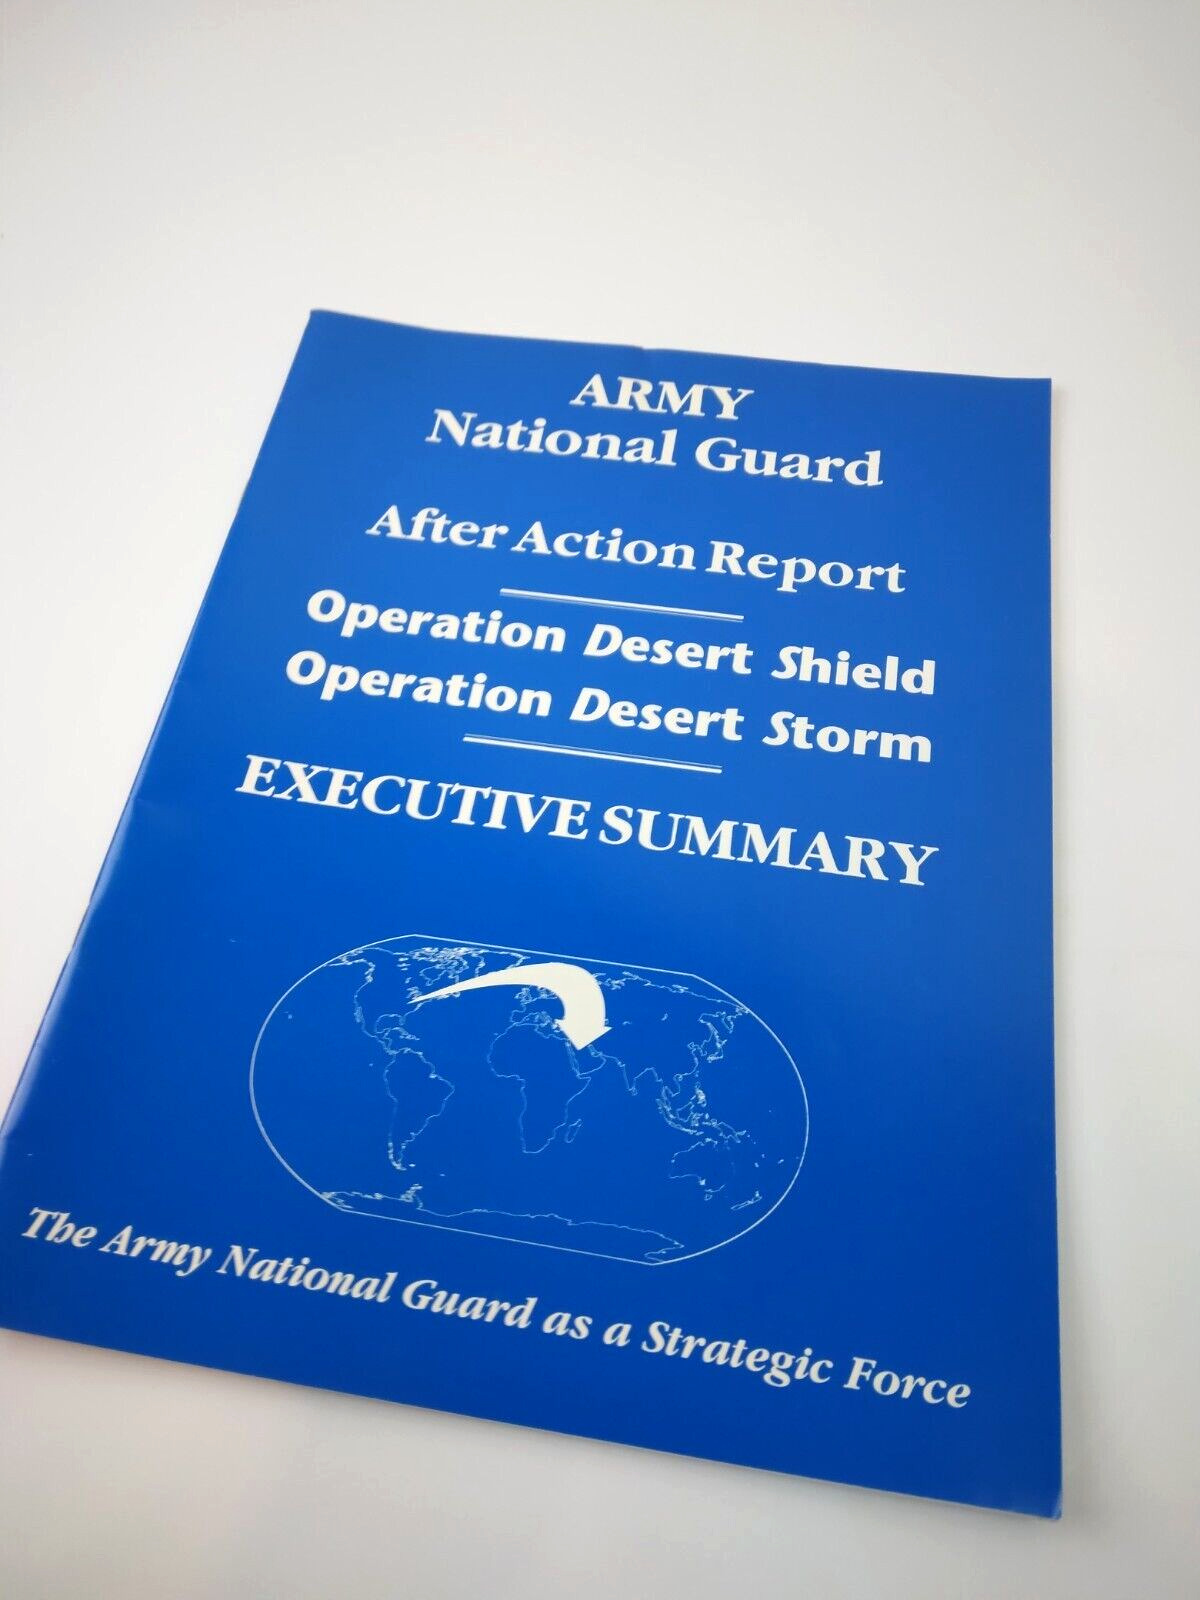 Army National Guard Operation Desert Shield/Storm After Action Report 1990-1991